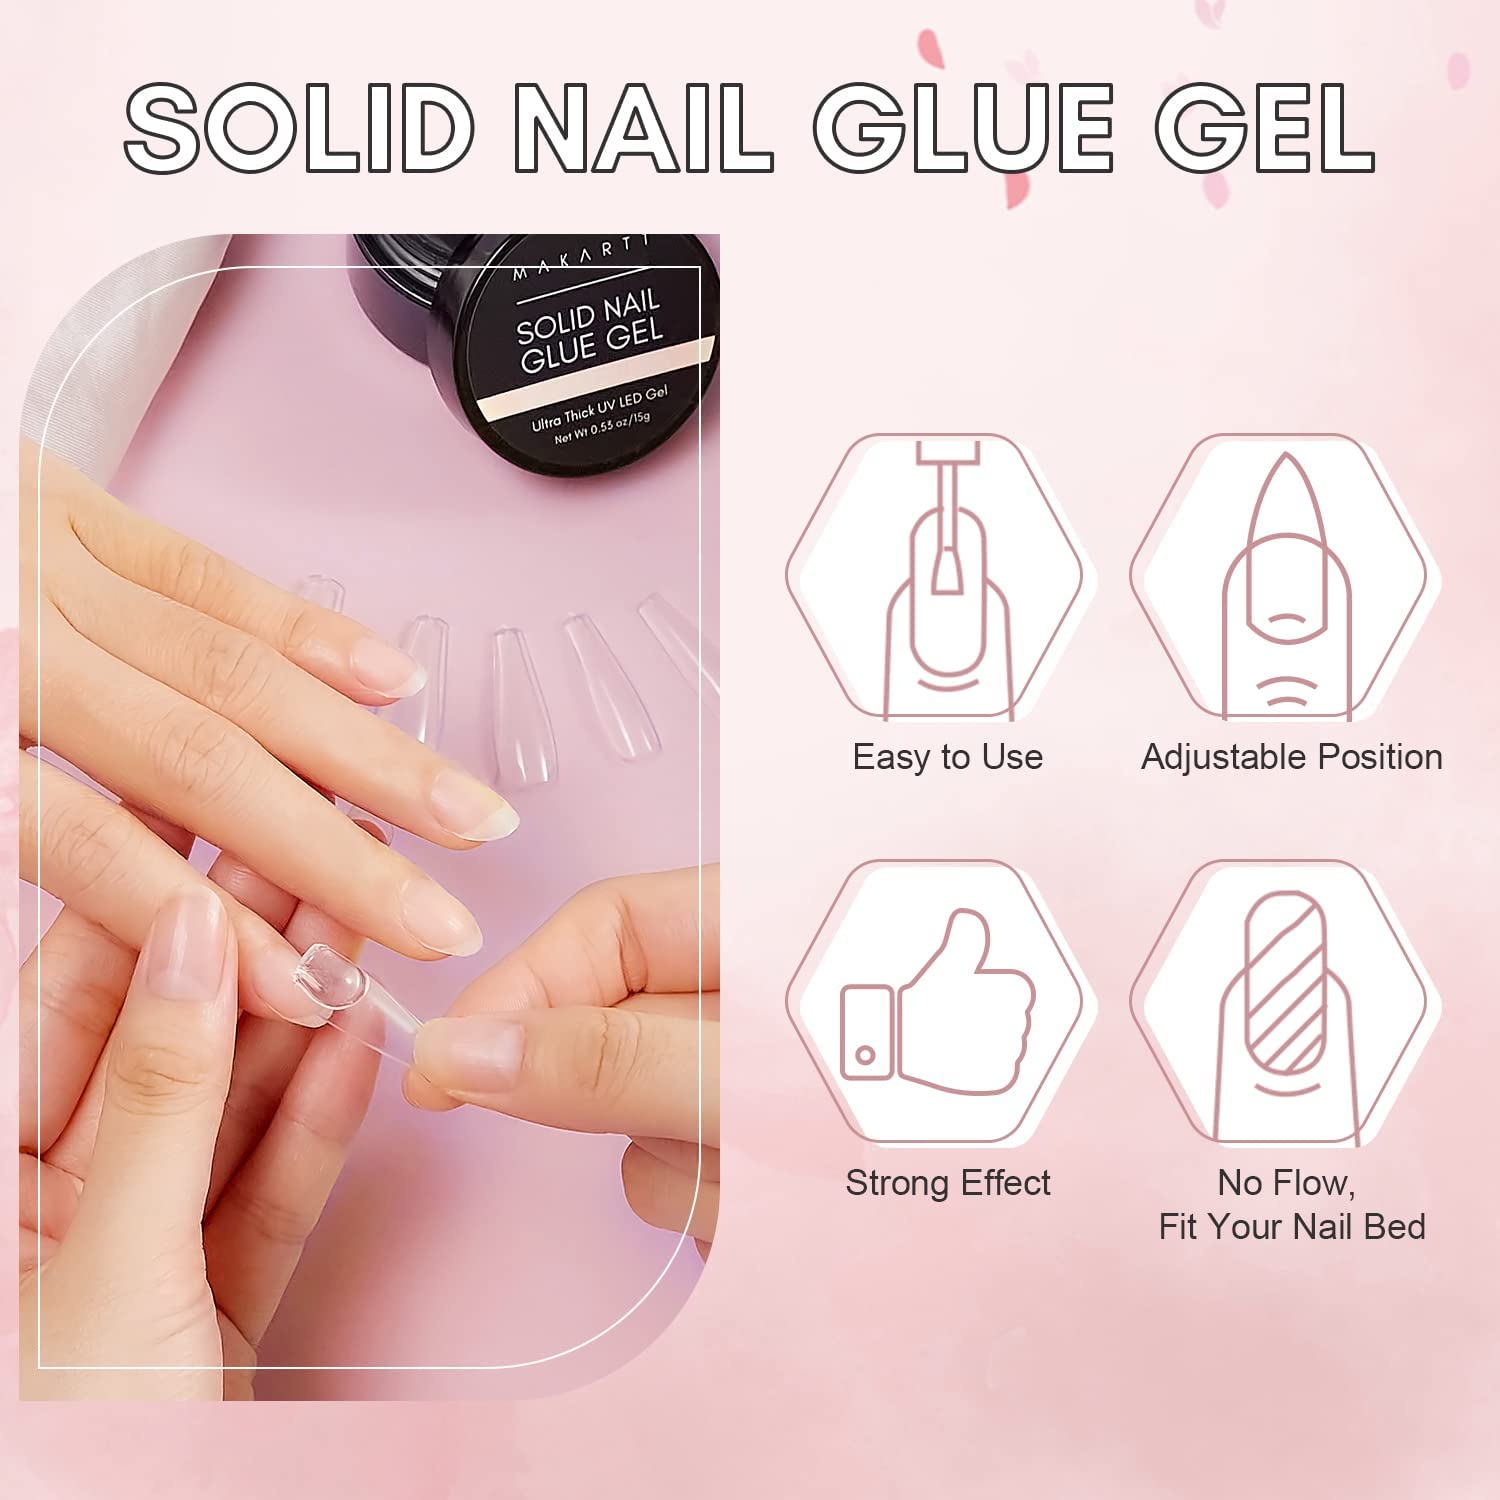 Solid Nail Gel Glue for Soft Gel Nail Tips - Clear 15ml